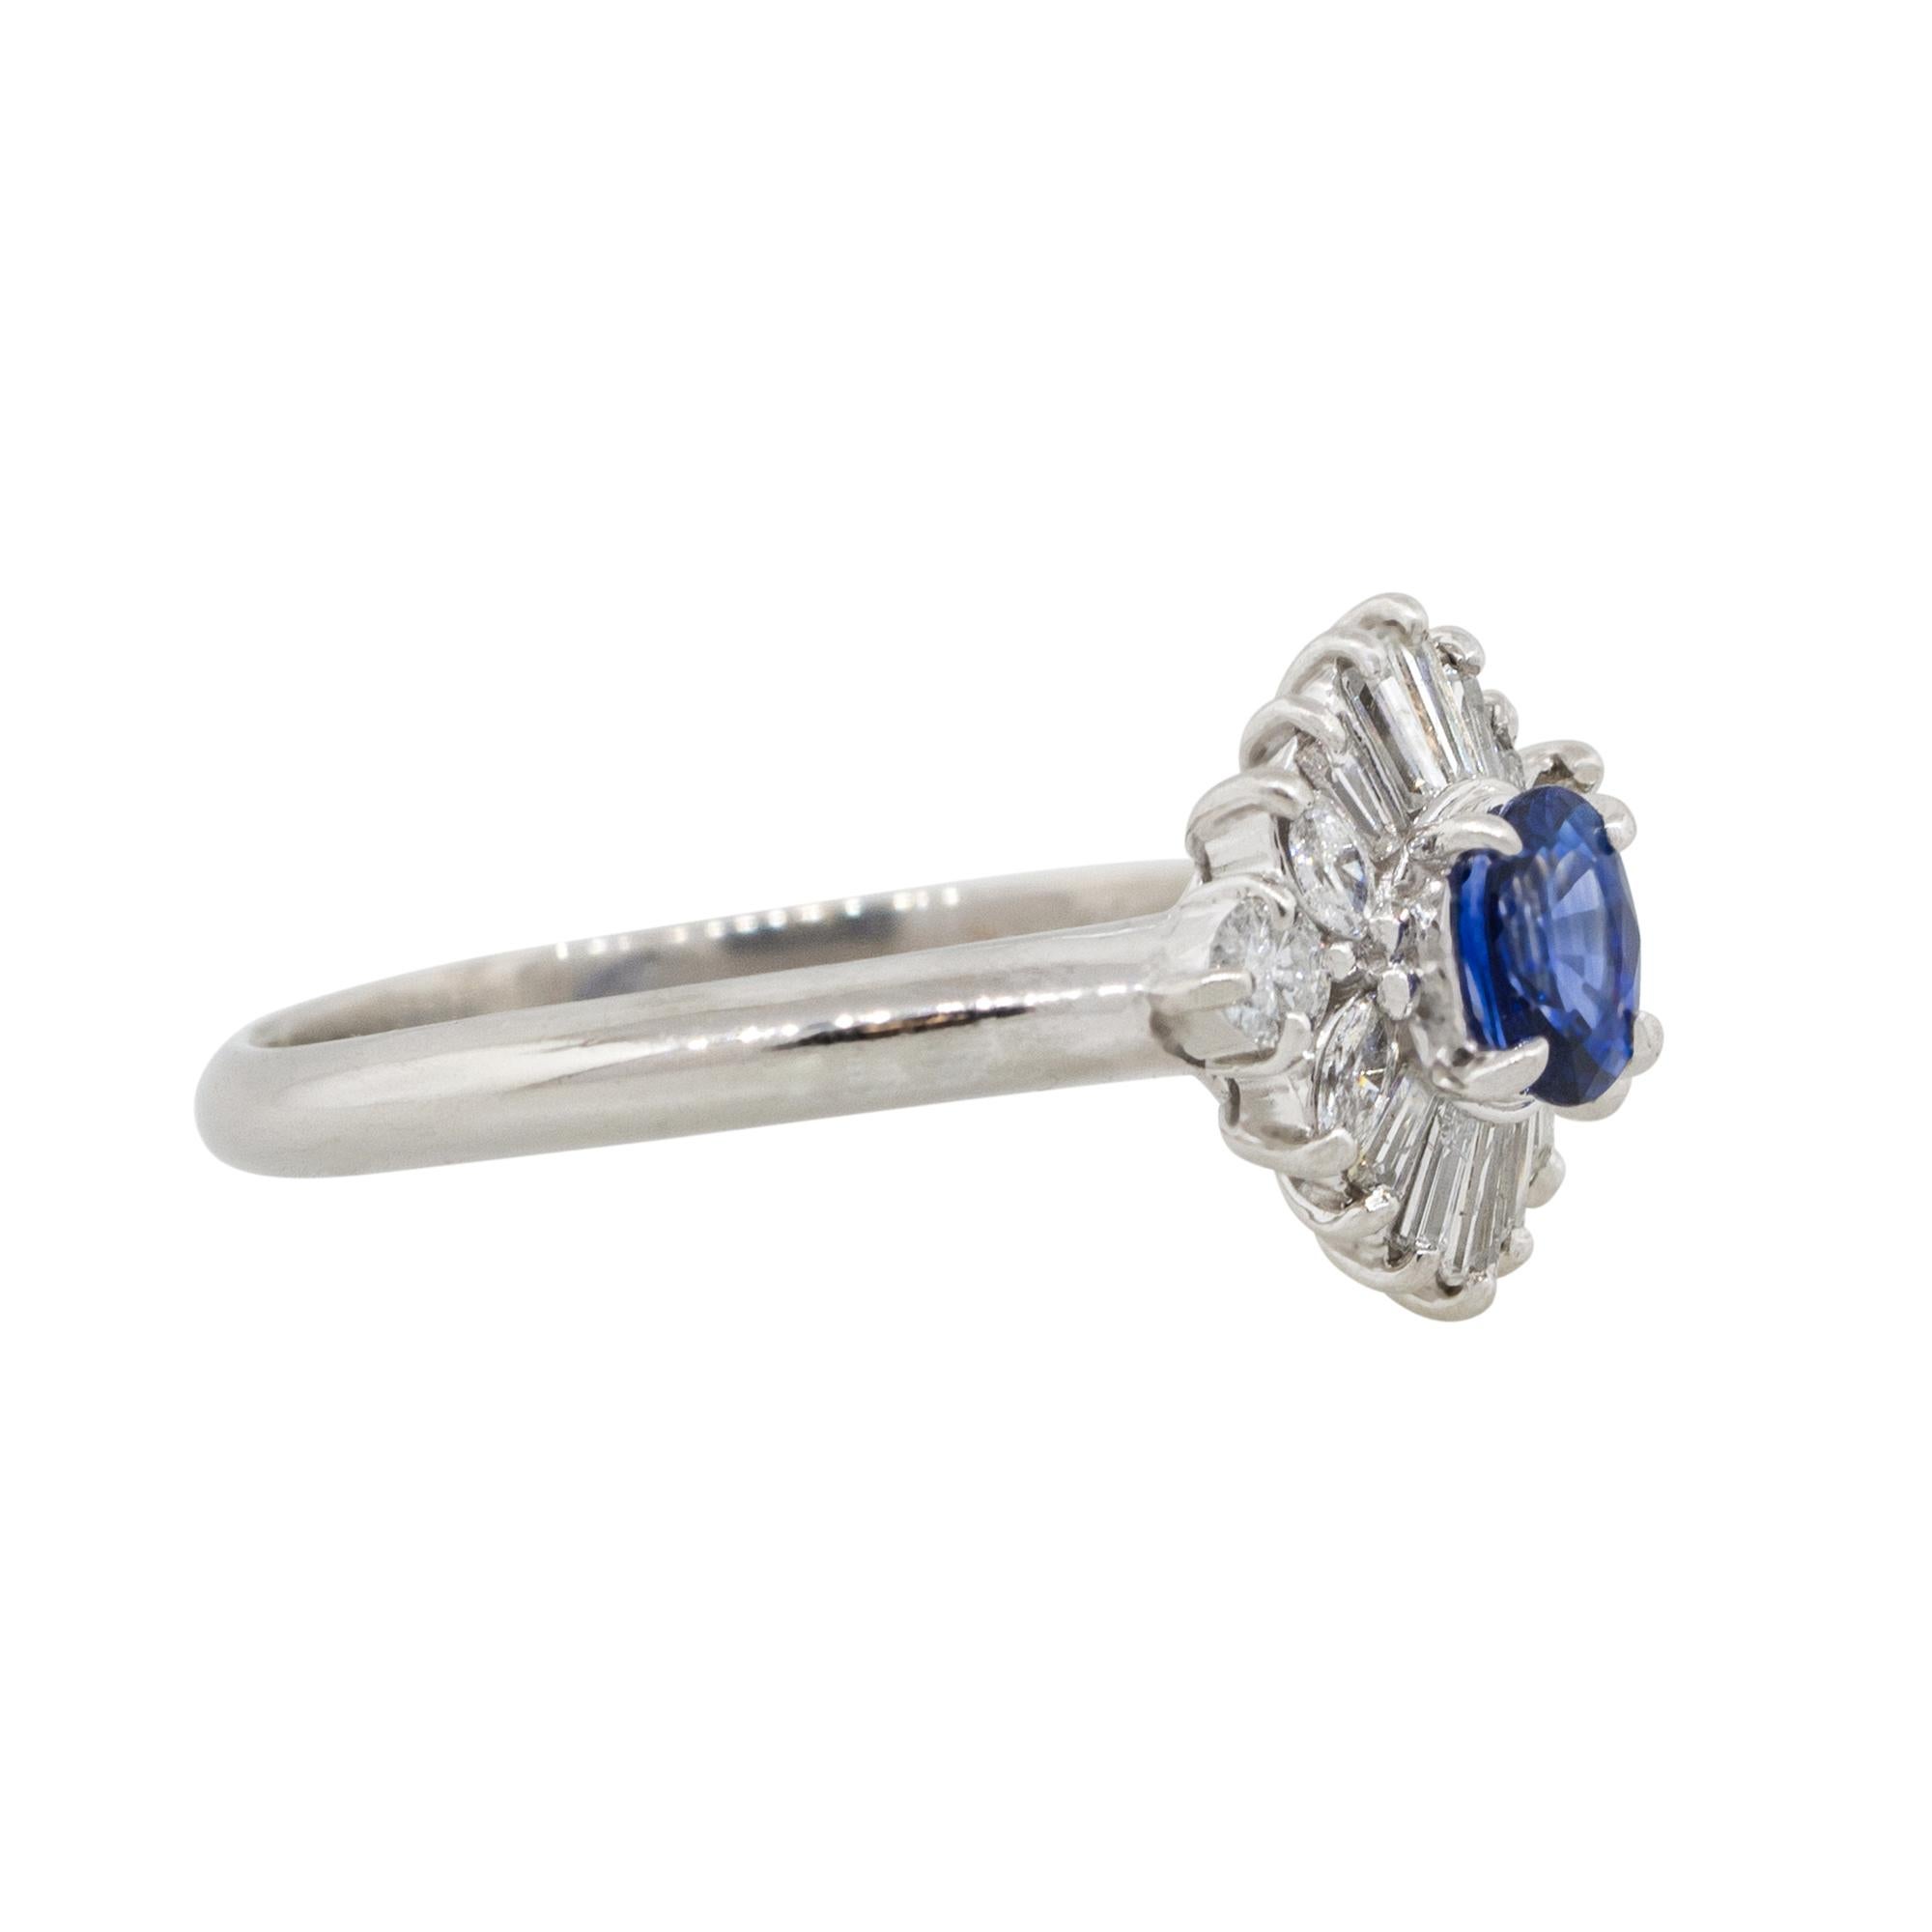 Material: Platinum
Gemstone details: Approx. 0.52ctw  oval shaped Sapphire center gemstone
Diamond details: Approx. 0.45ctw of round and baguette cut Diamonds. Diamonds are G/H in color and VS in clarity
Ring Size: 8.25
Ring Measurements: 0.95